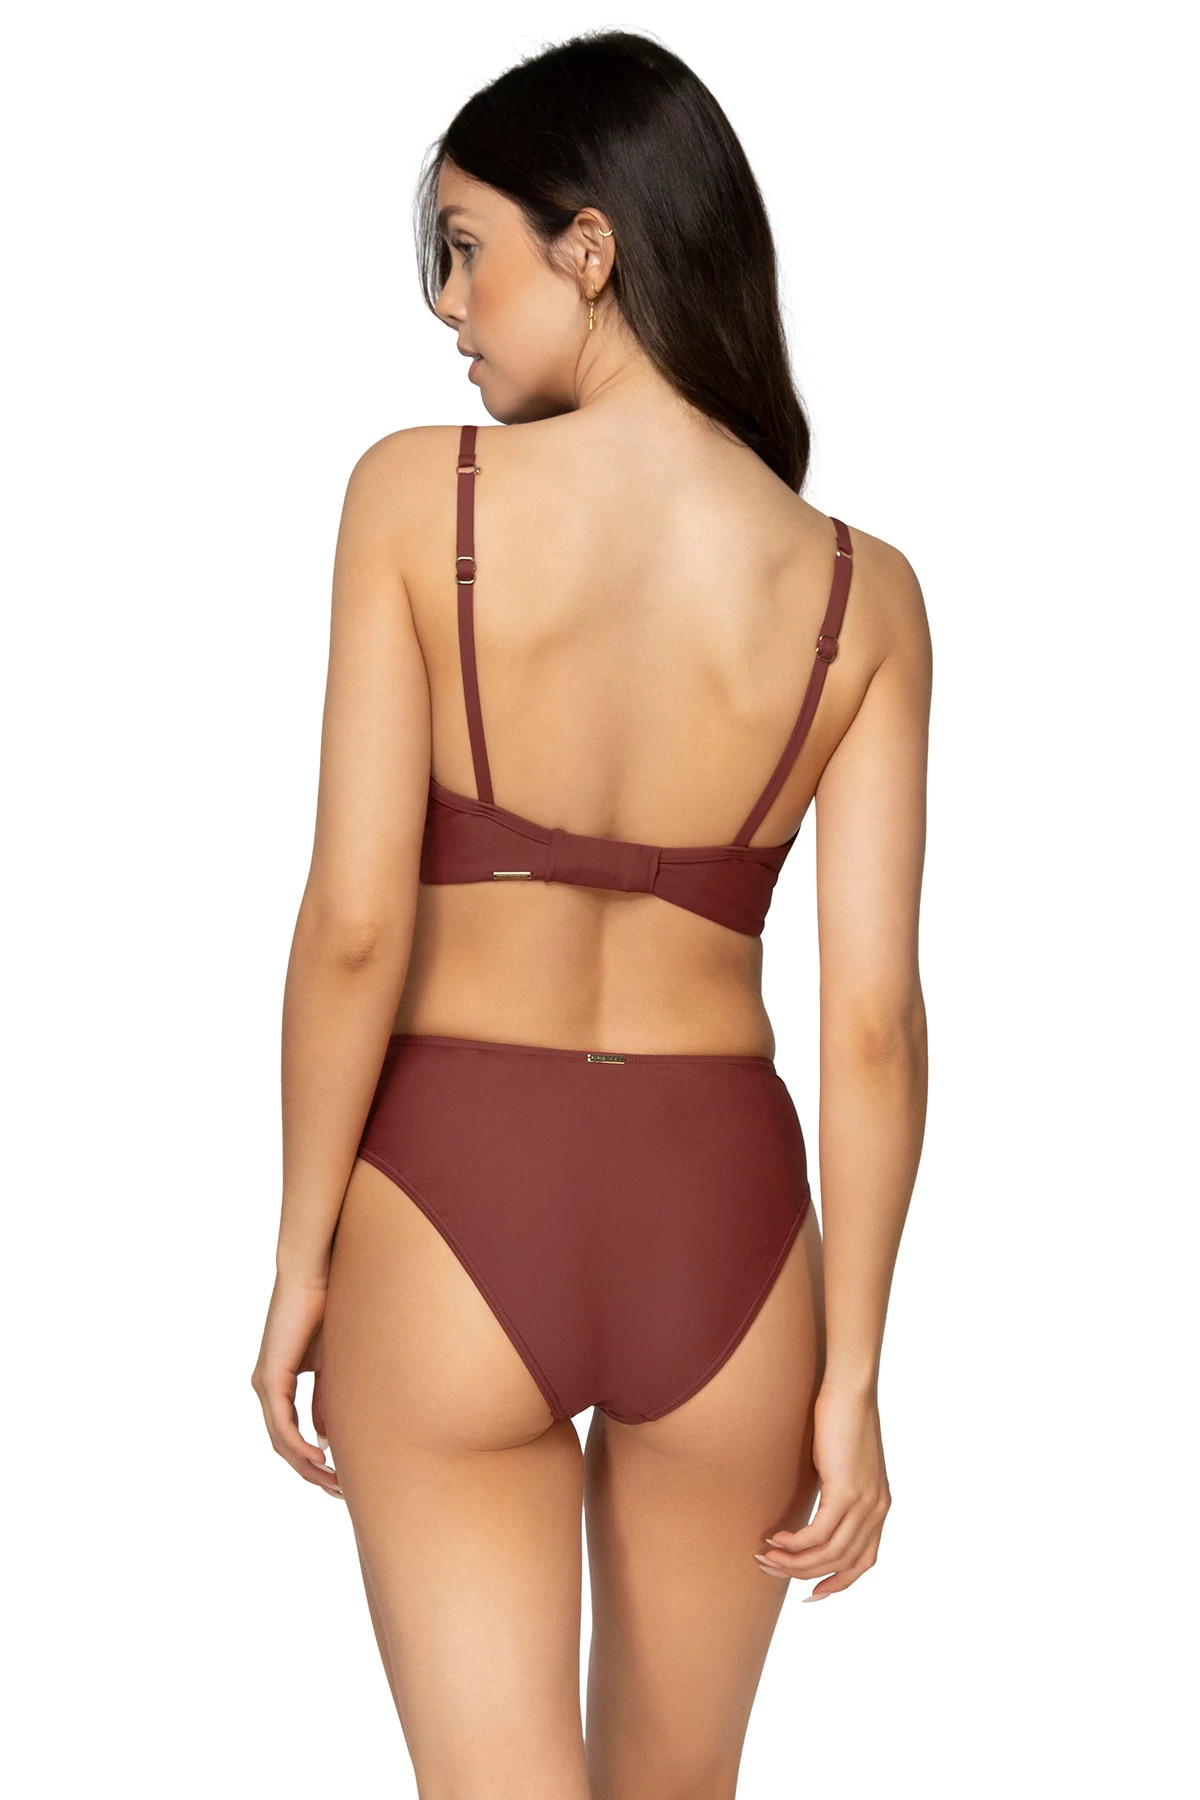 TUSCAN RED Crossroads Underwire Bikini Top (E-H Cup) image number 3